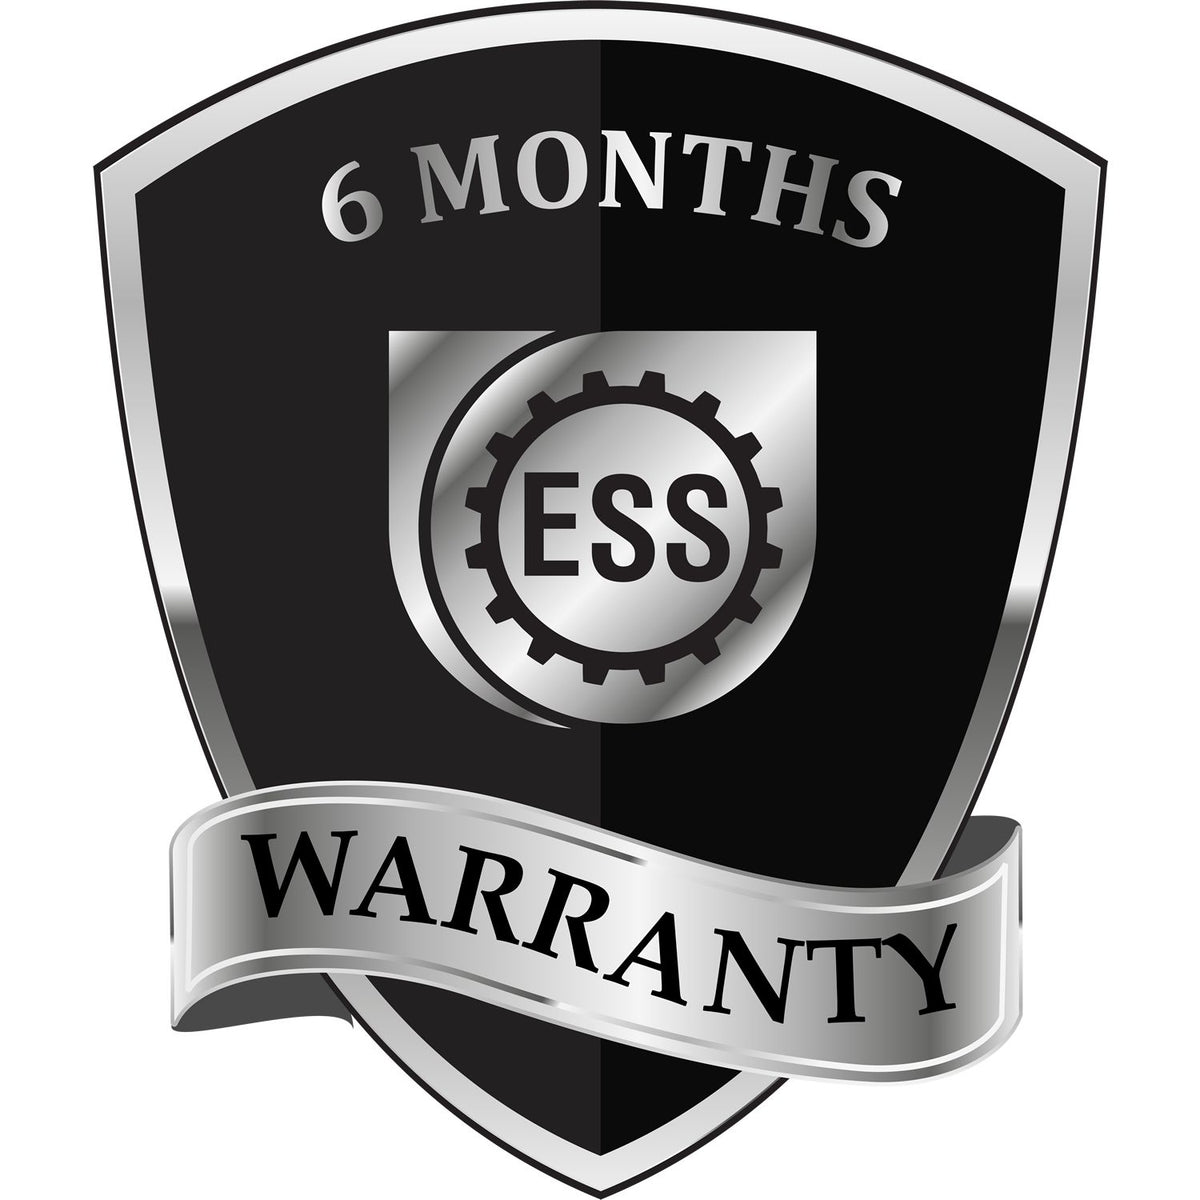 A badge or emblem showing a warranty icon for the Slim Pre-Inked Nebraska Professional Engineer Seal Stamp